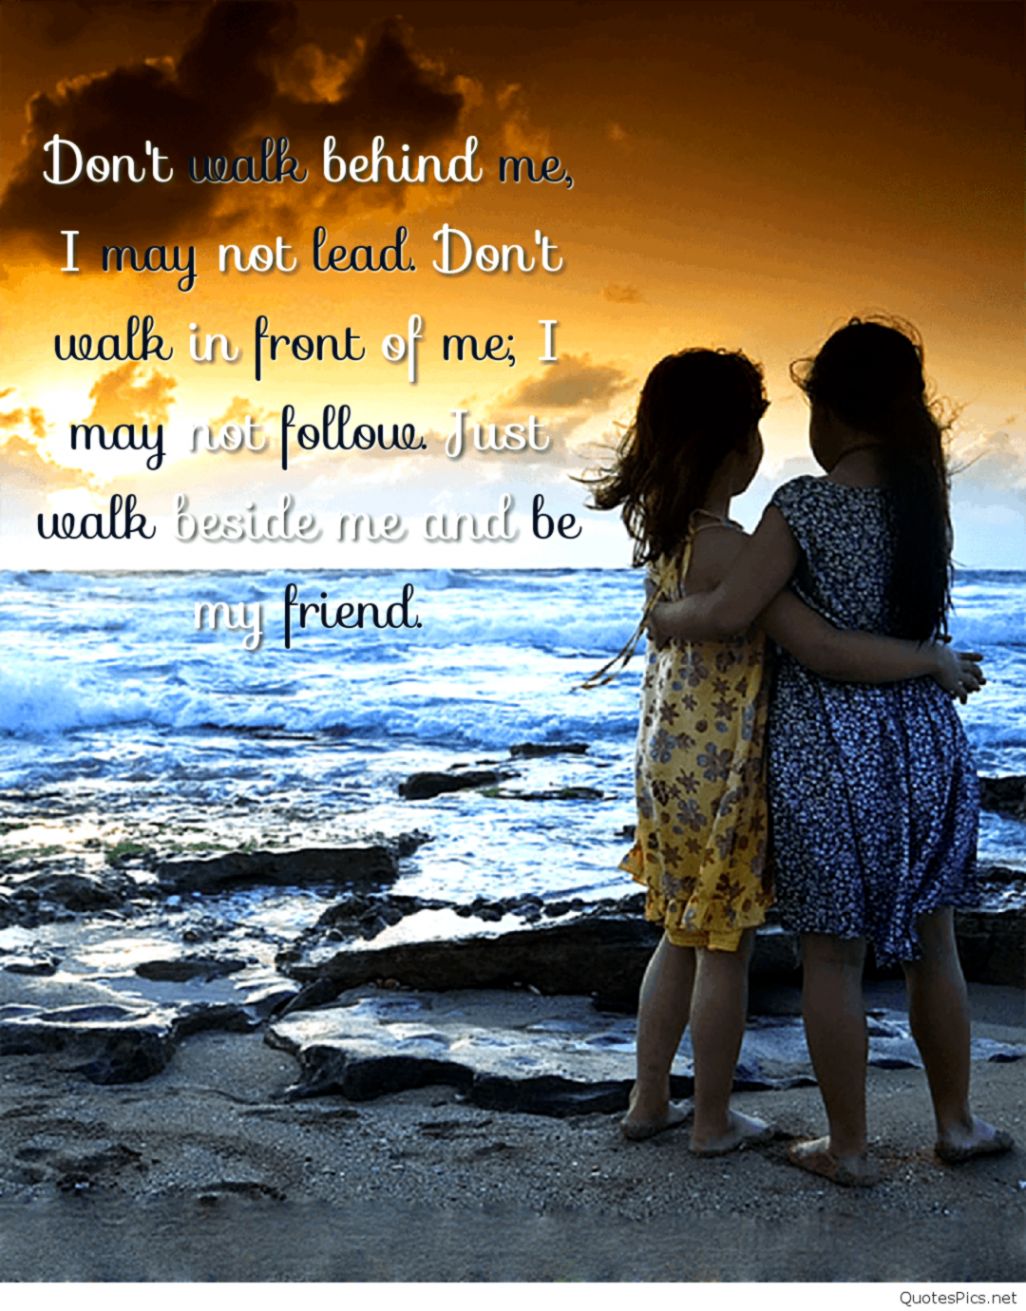 Friendship Day Quotes Images Download , HD Wallpaper & Backgrounds